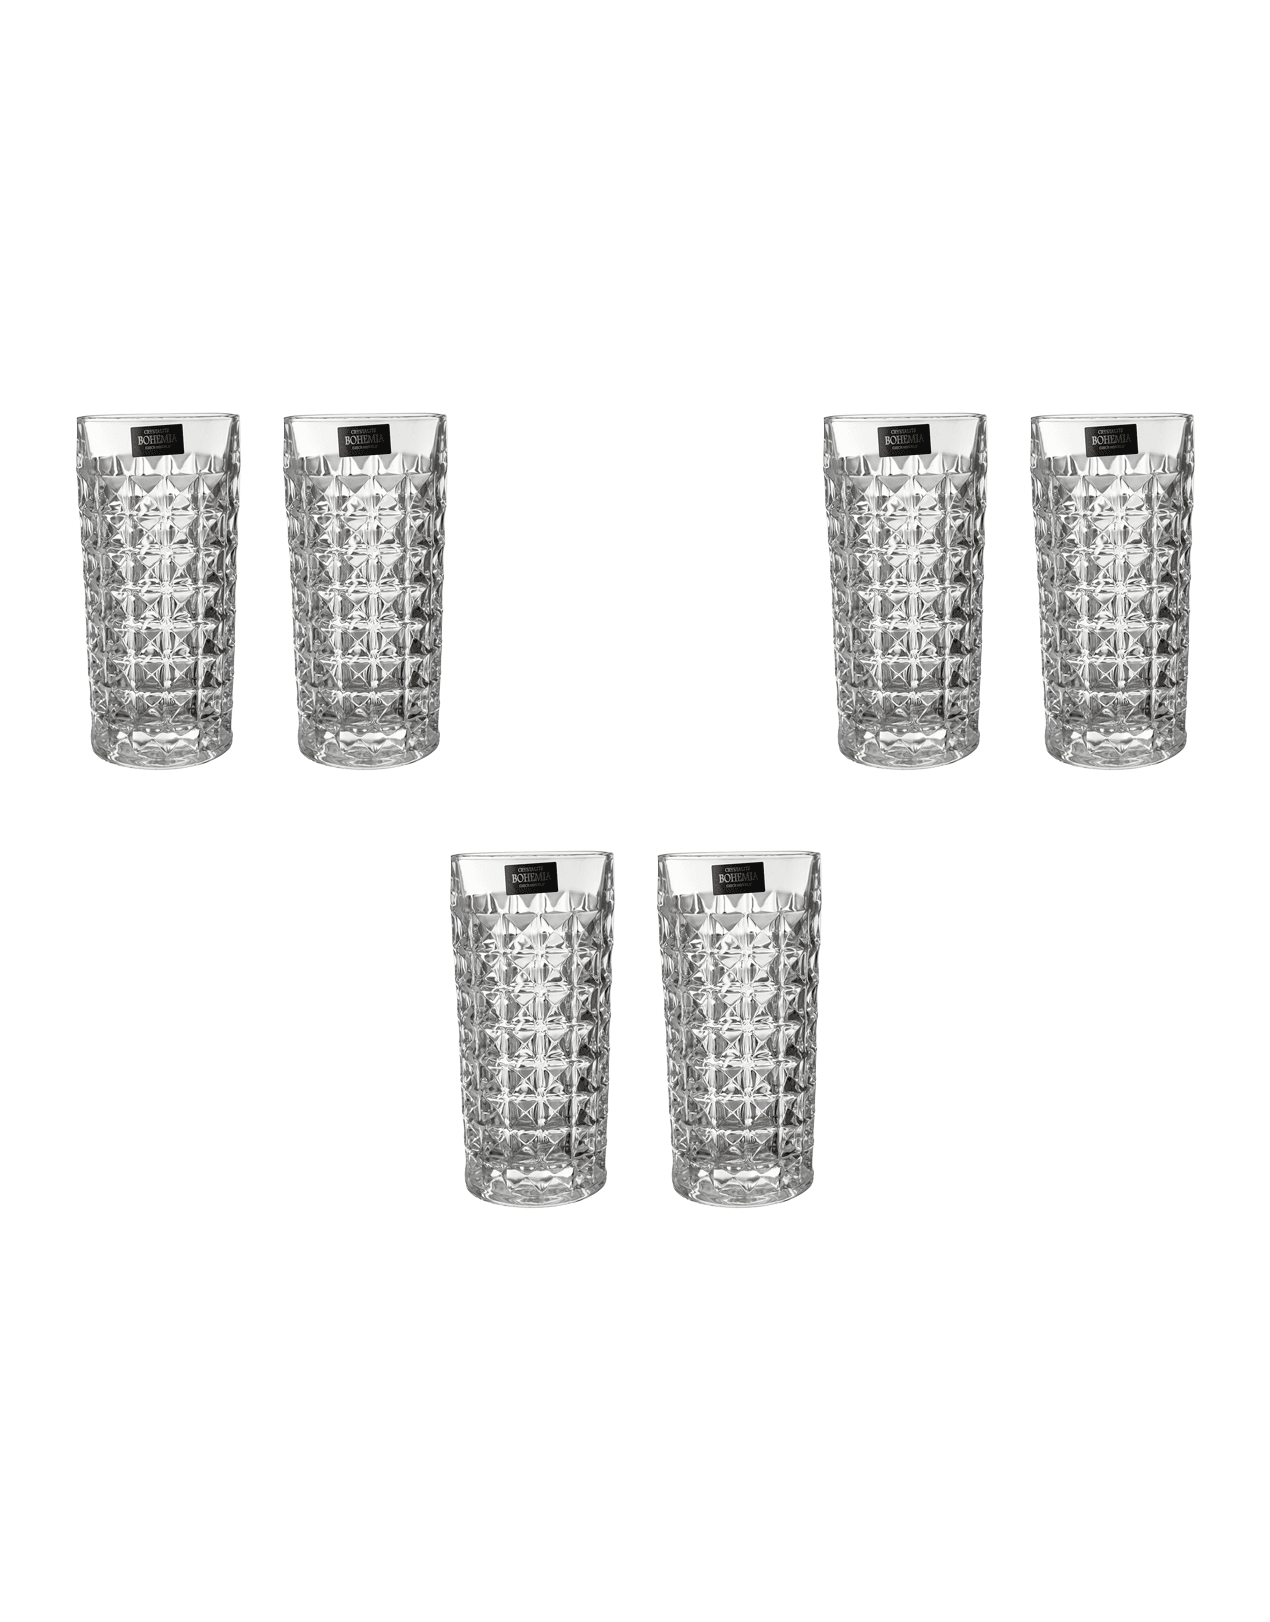 Crystal water glasses, 320ml, 6 pieces - Cristalopolis